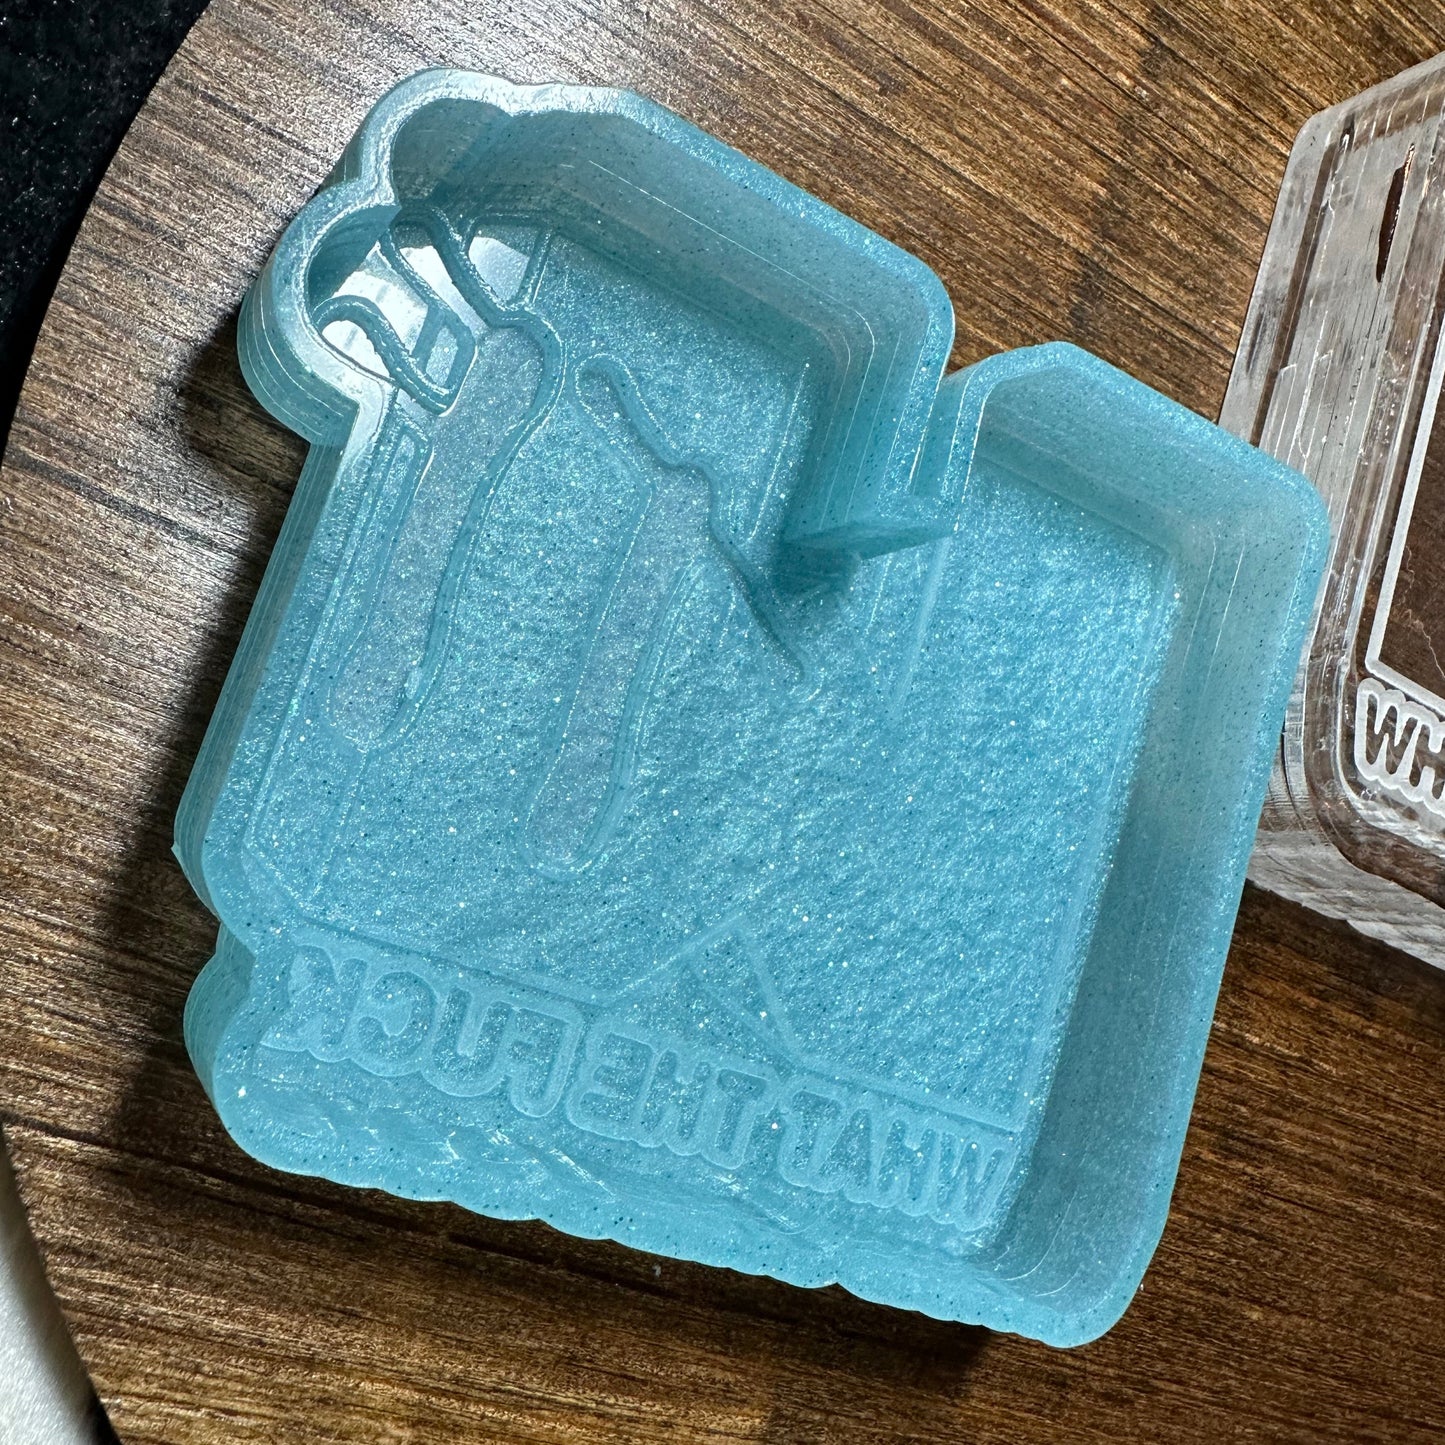 WTF - What The F@ck Silicone Mold